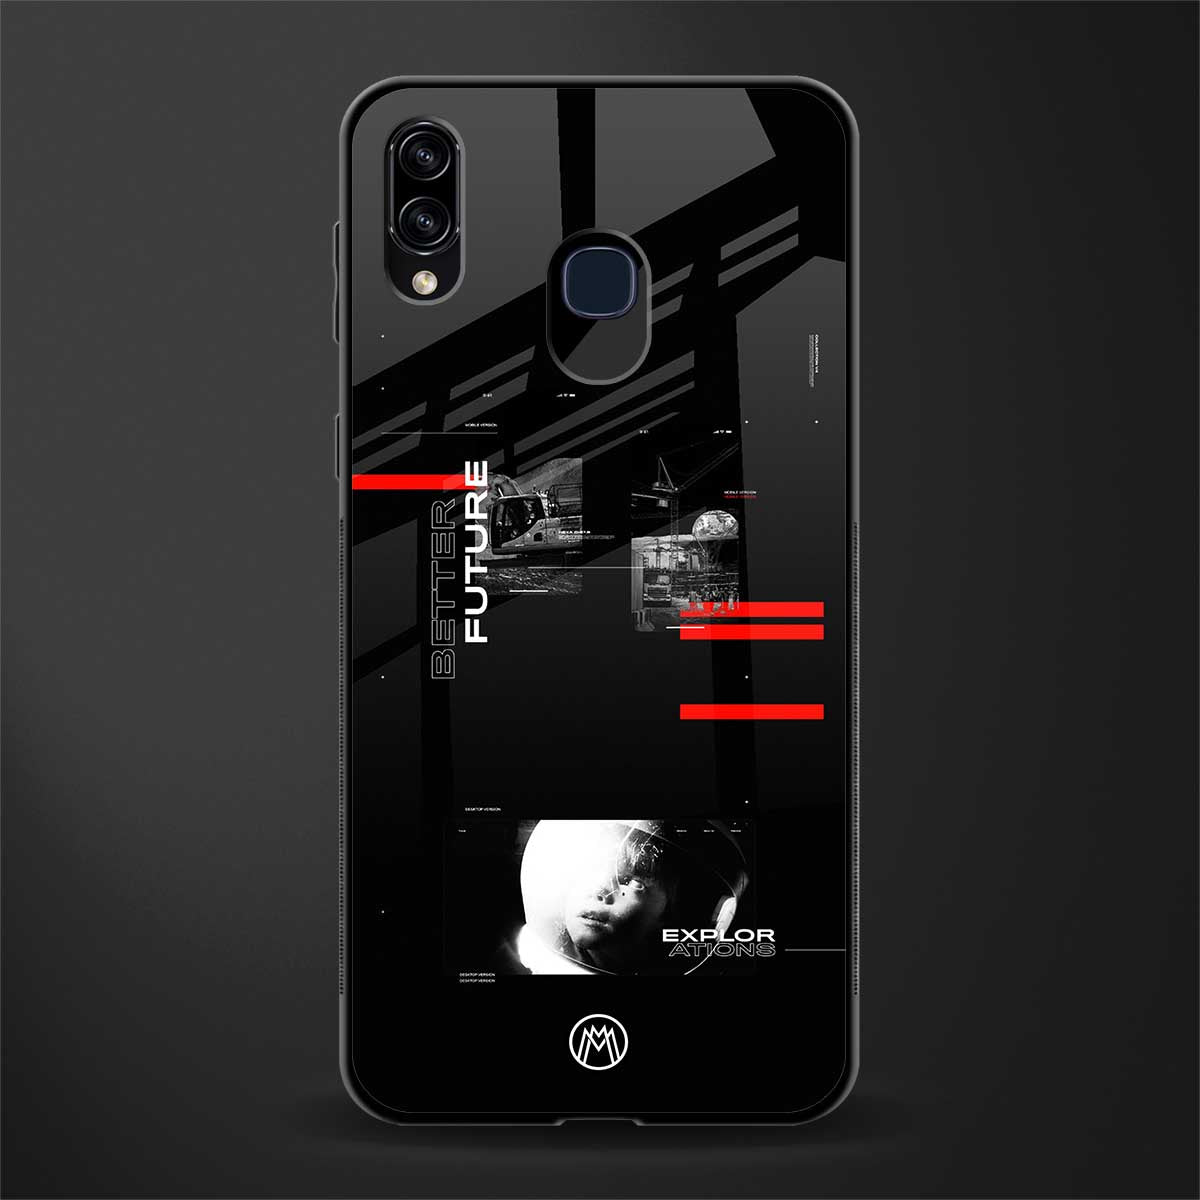 better future dark aesthetic glass case for samsung galaxy a30 image